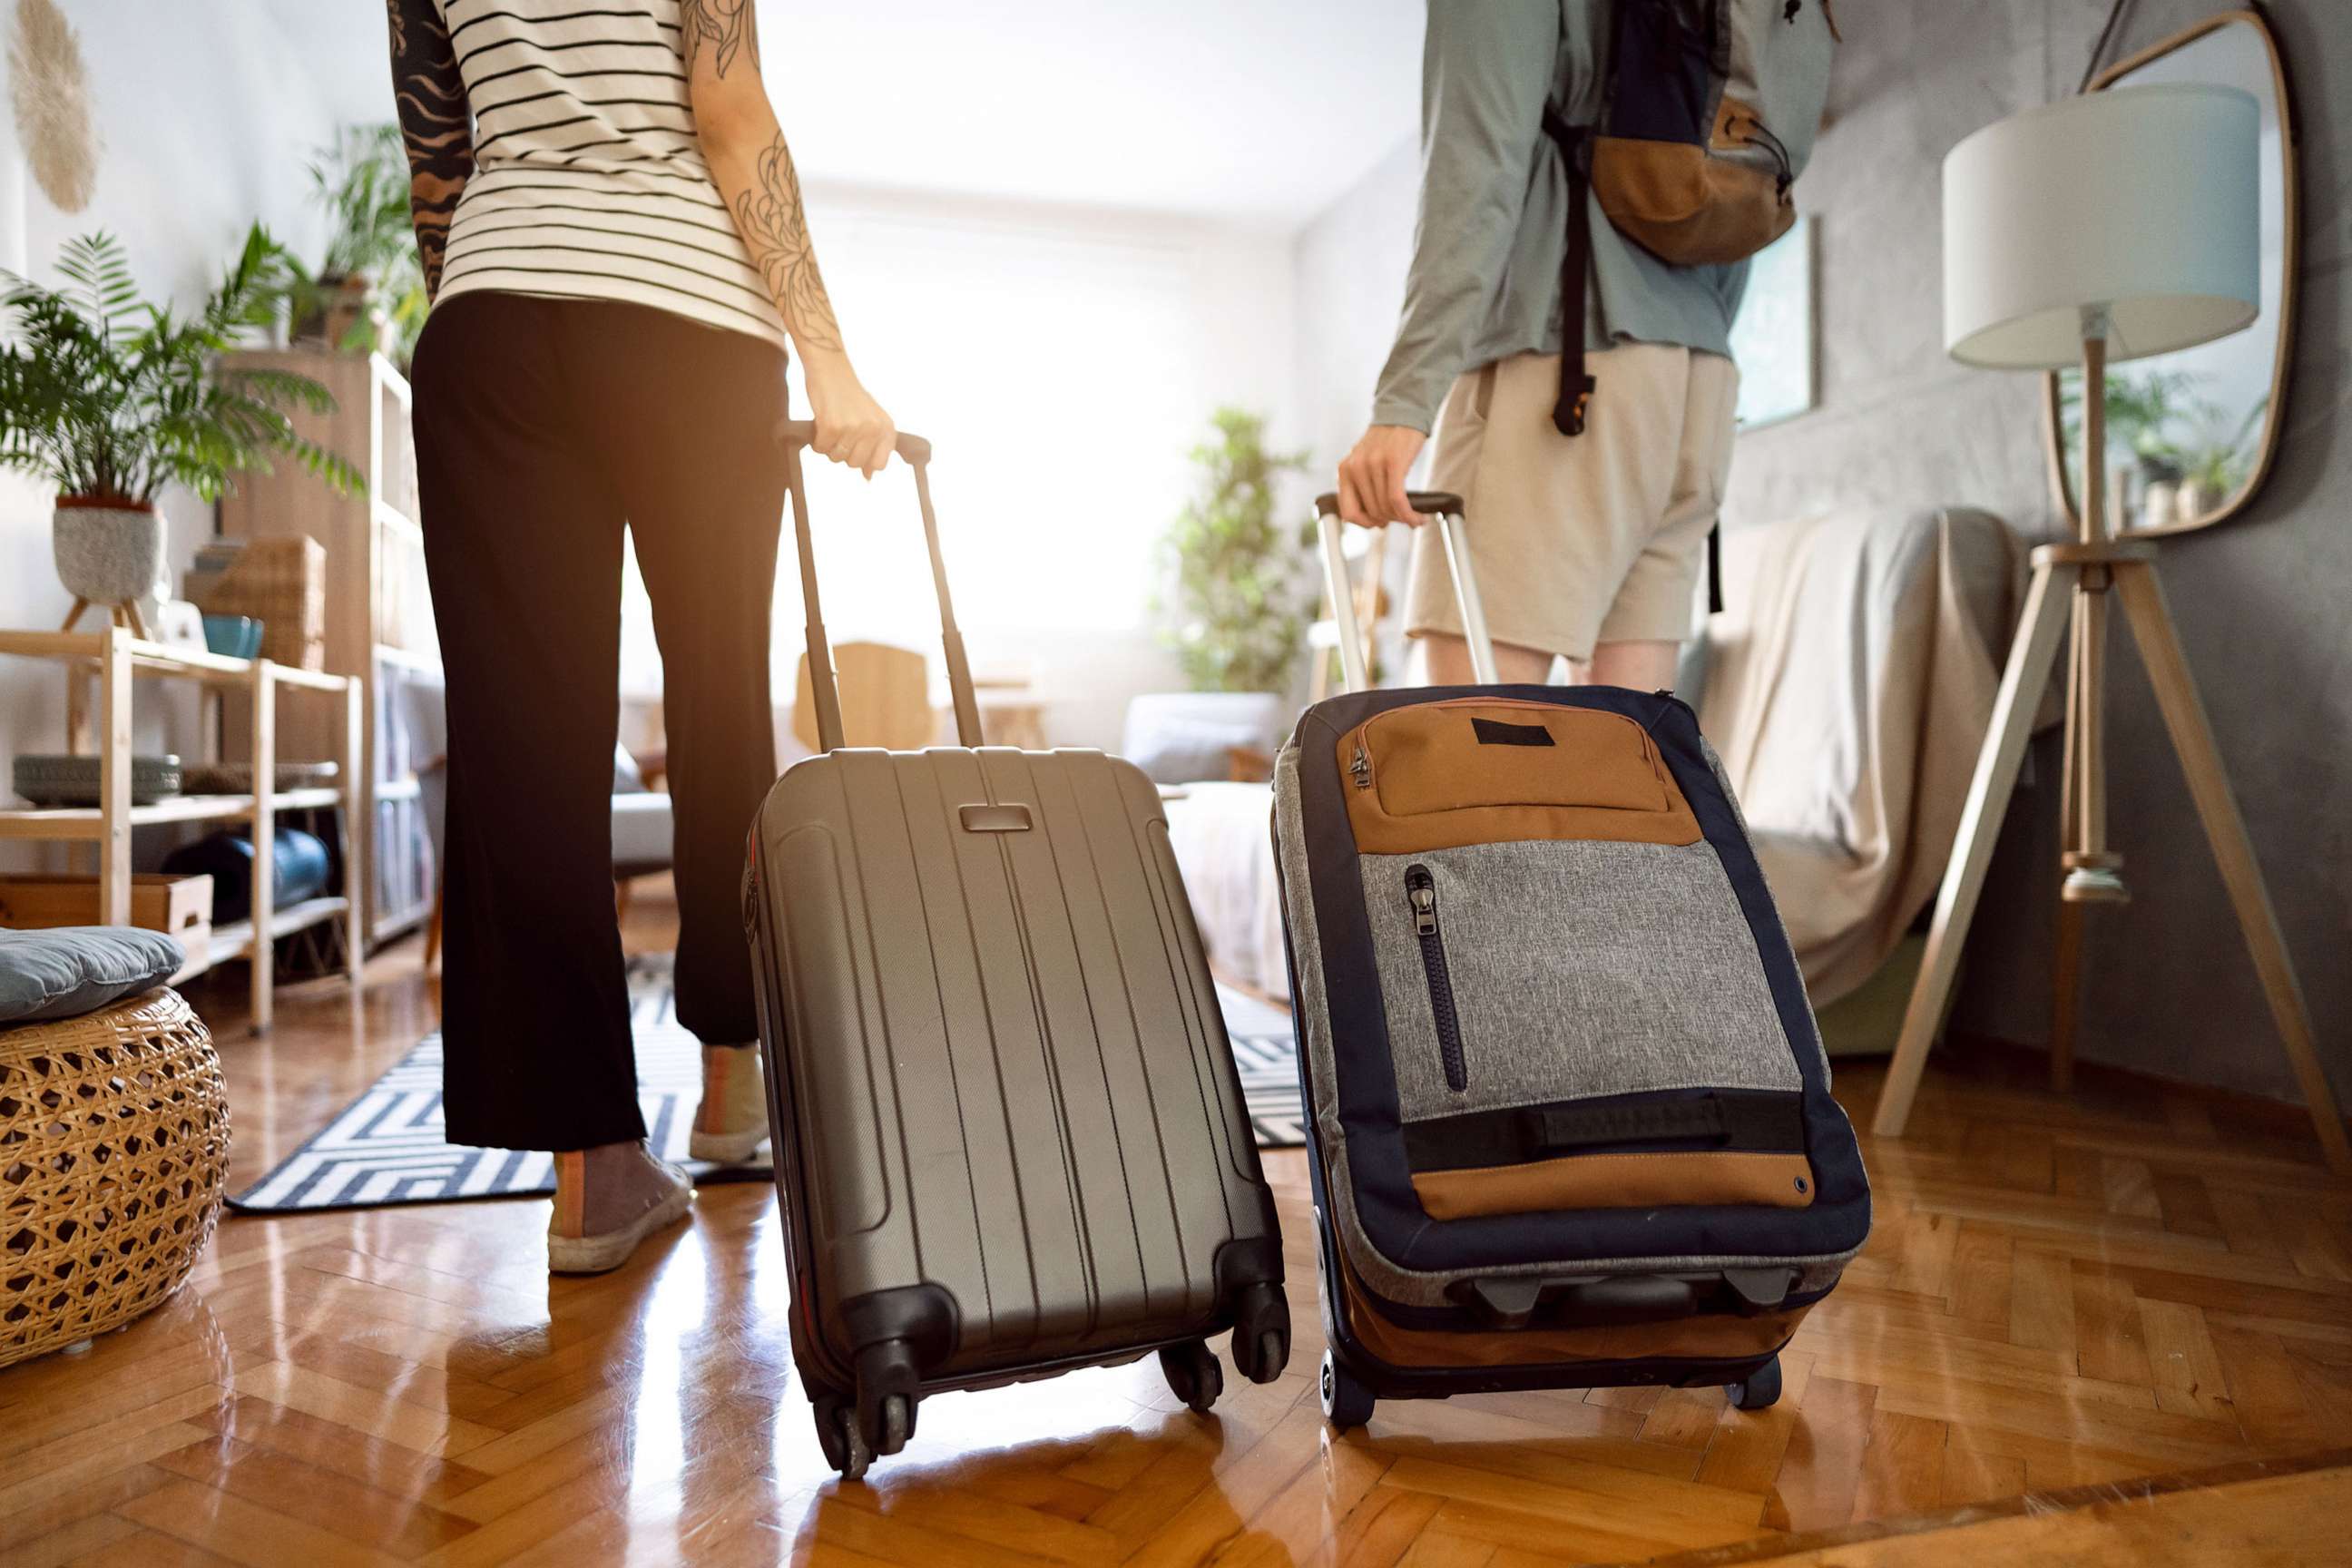 PHOTO: Two people check in to an air bnb type home in this undated stock photo.